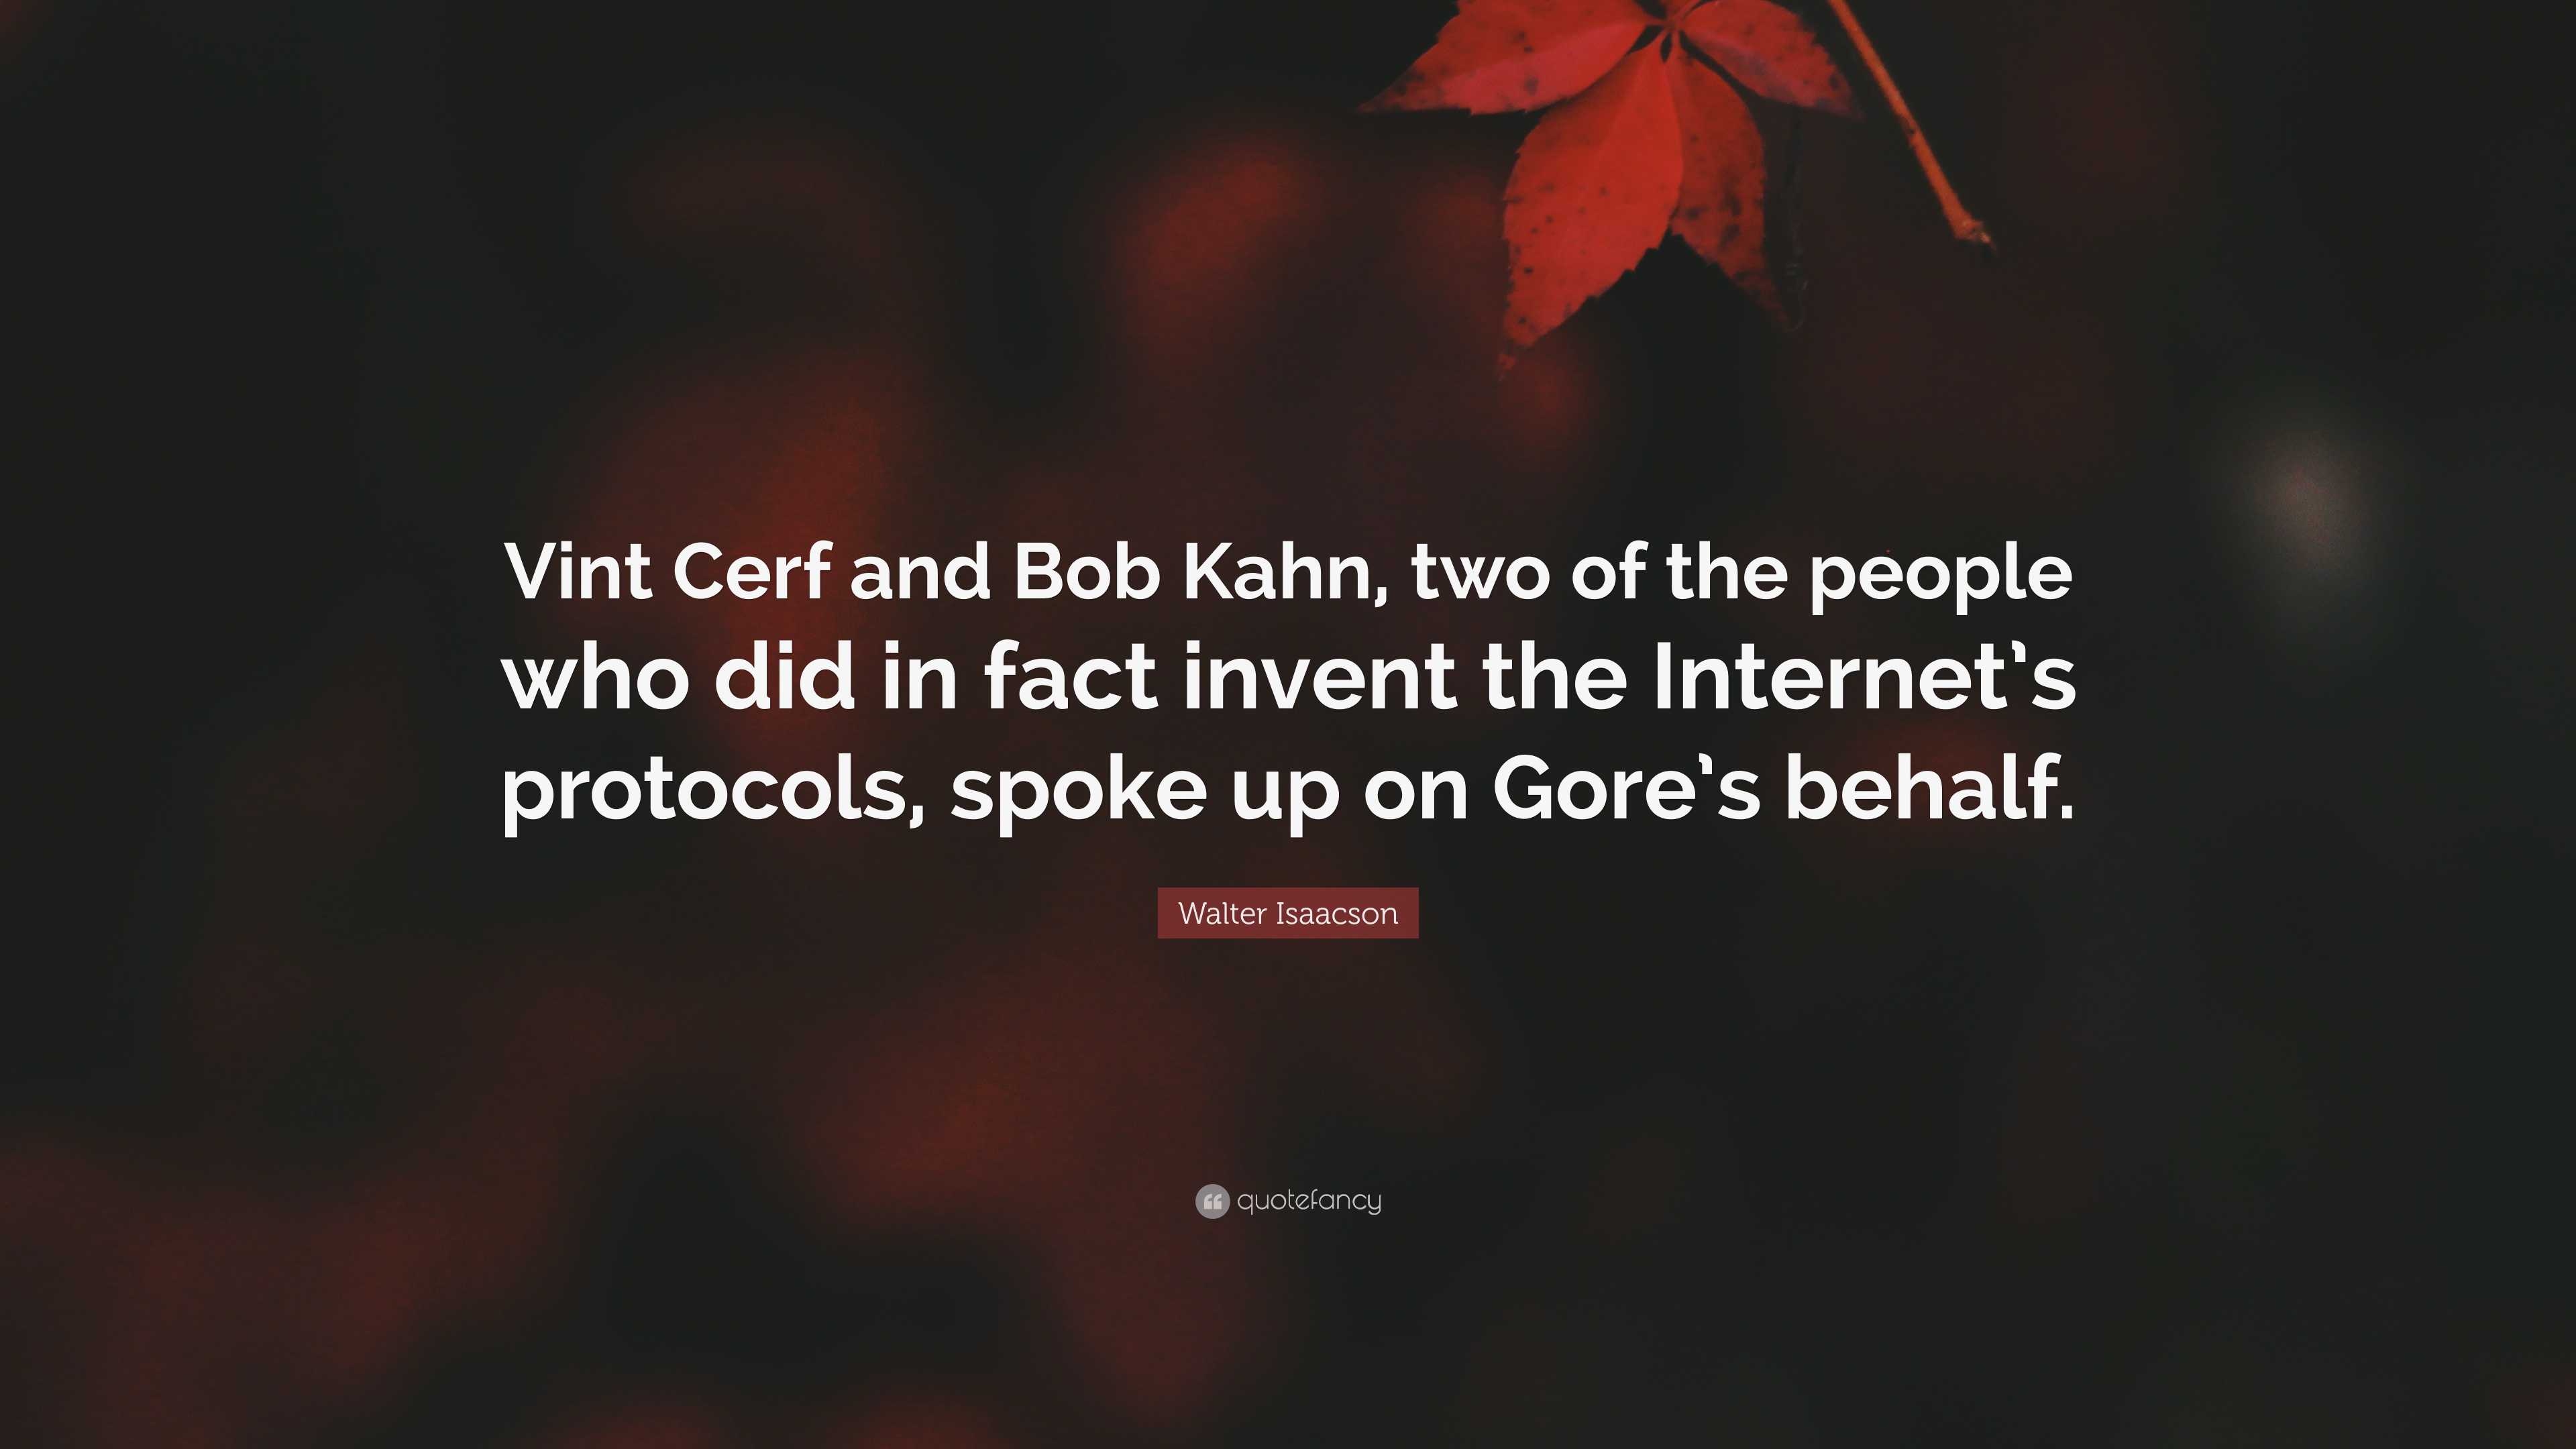 Walter Isaacson Quote: “Vint Cerf and Bob Kahn, two of the people who ...